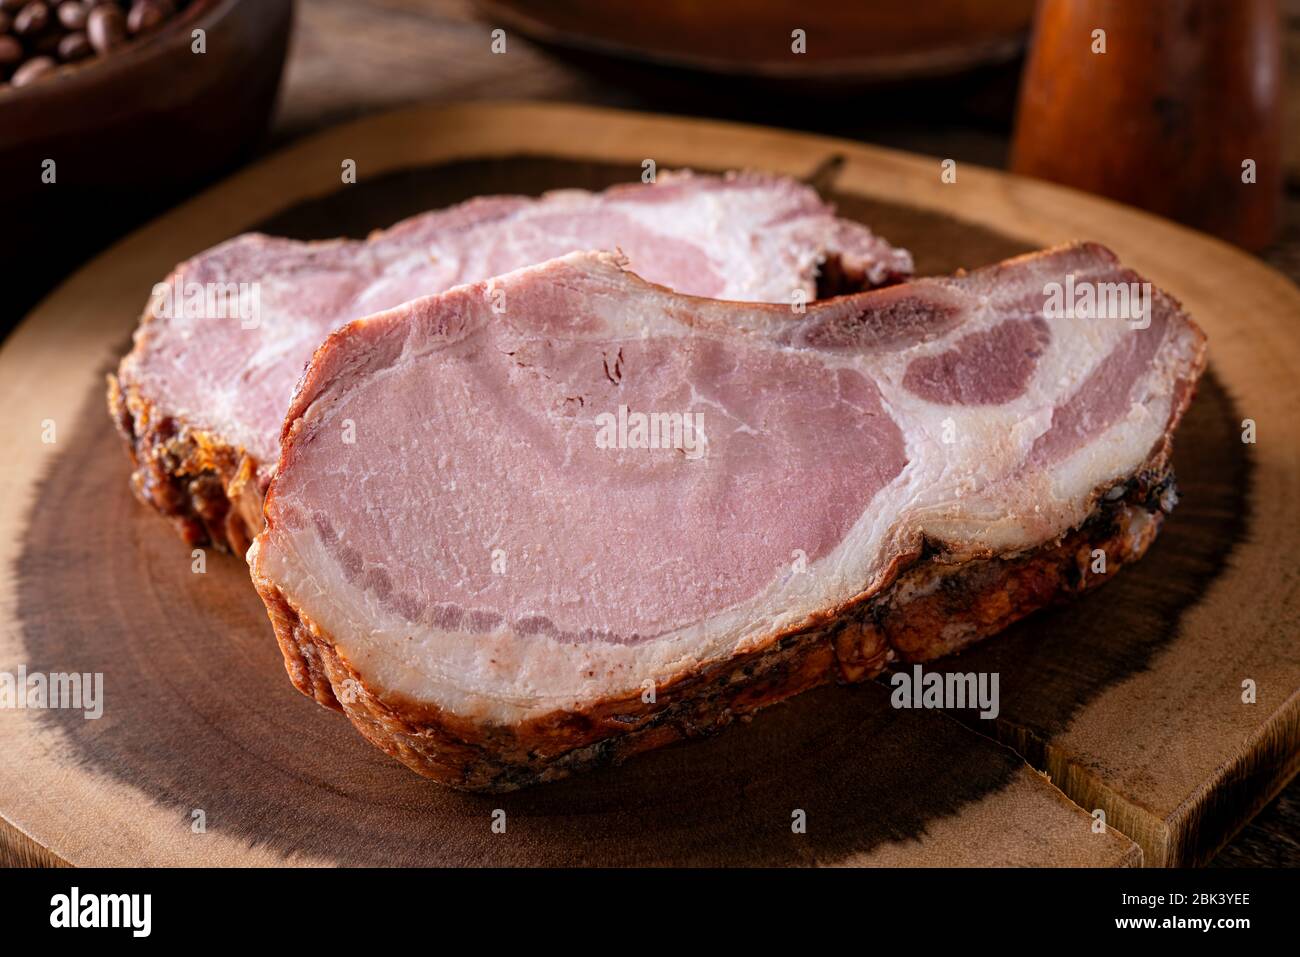 Delicious smoked pork chops on a rustic wood cutting board. Stock Photo